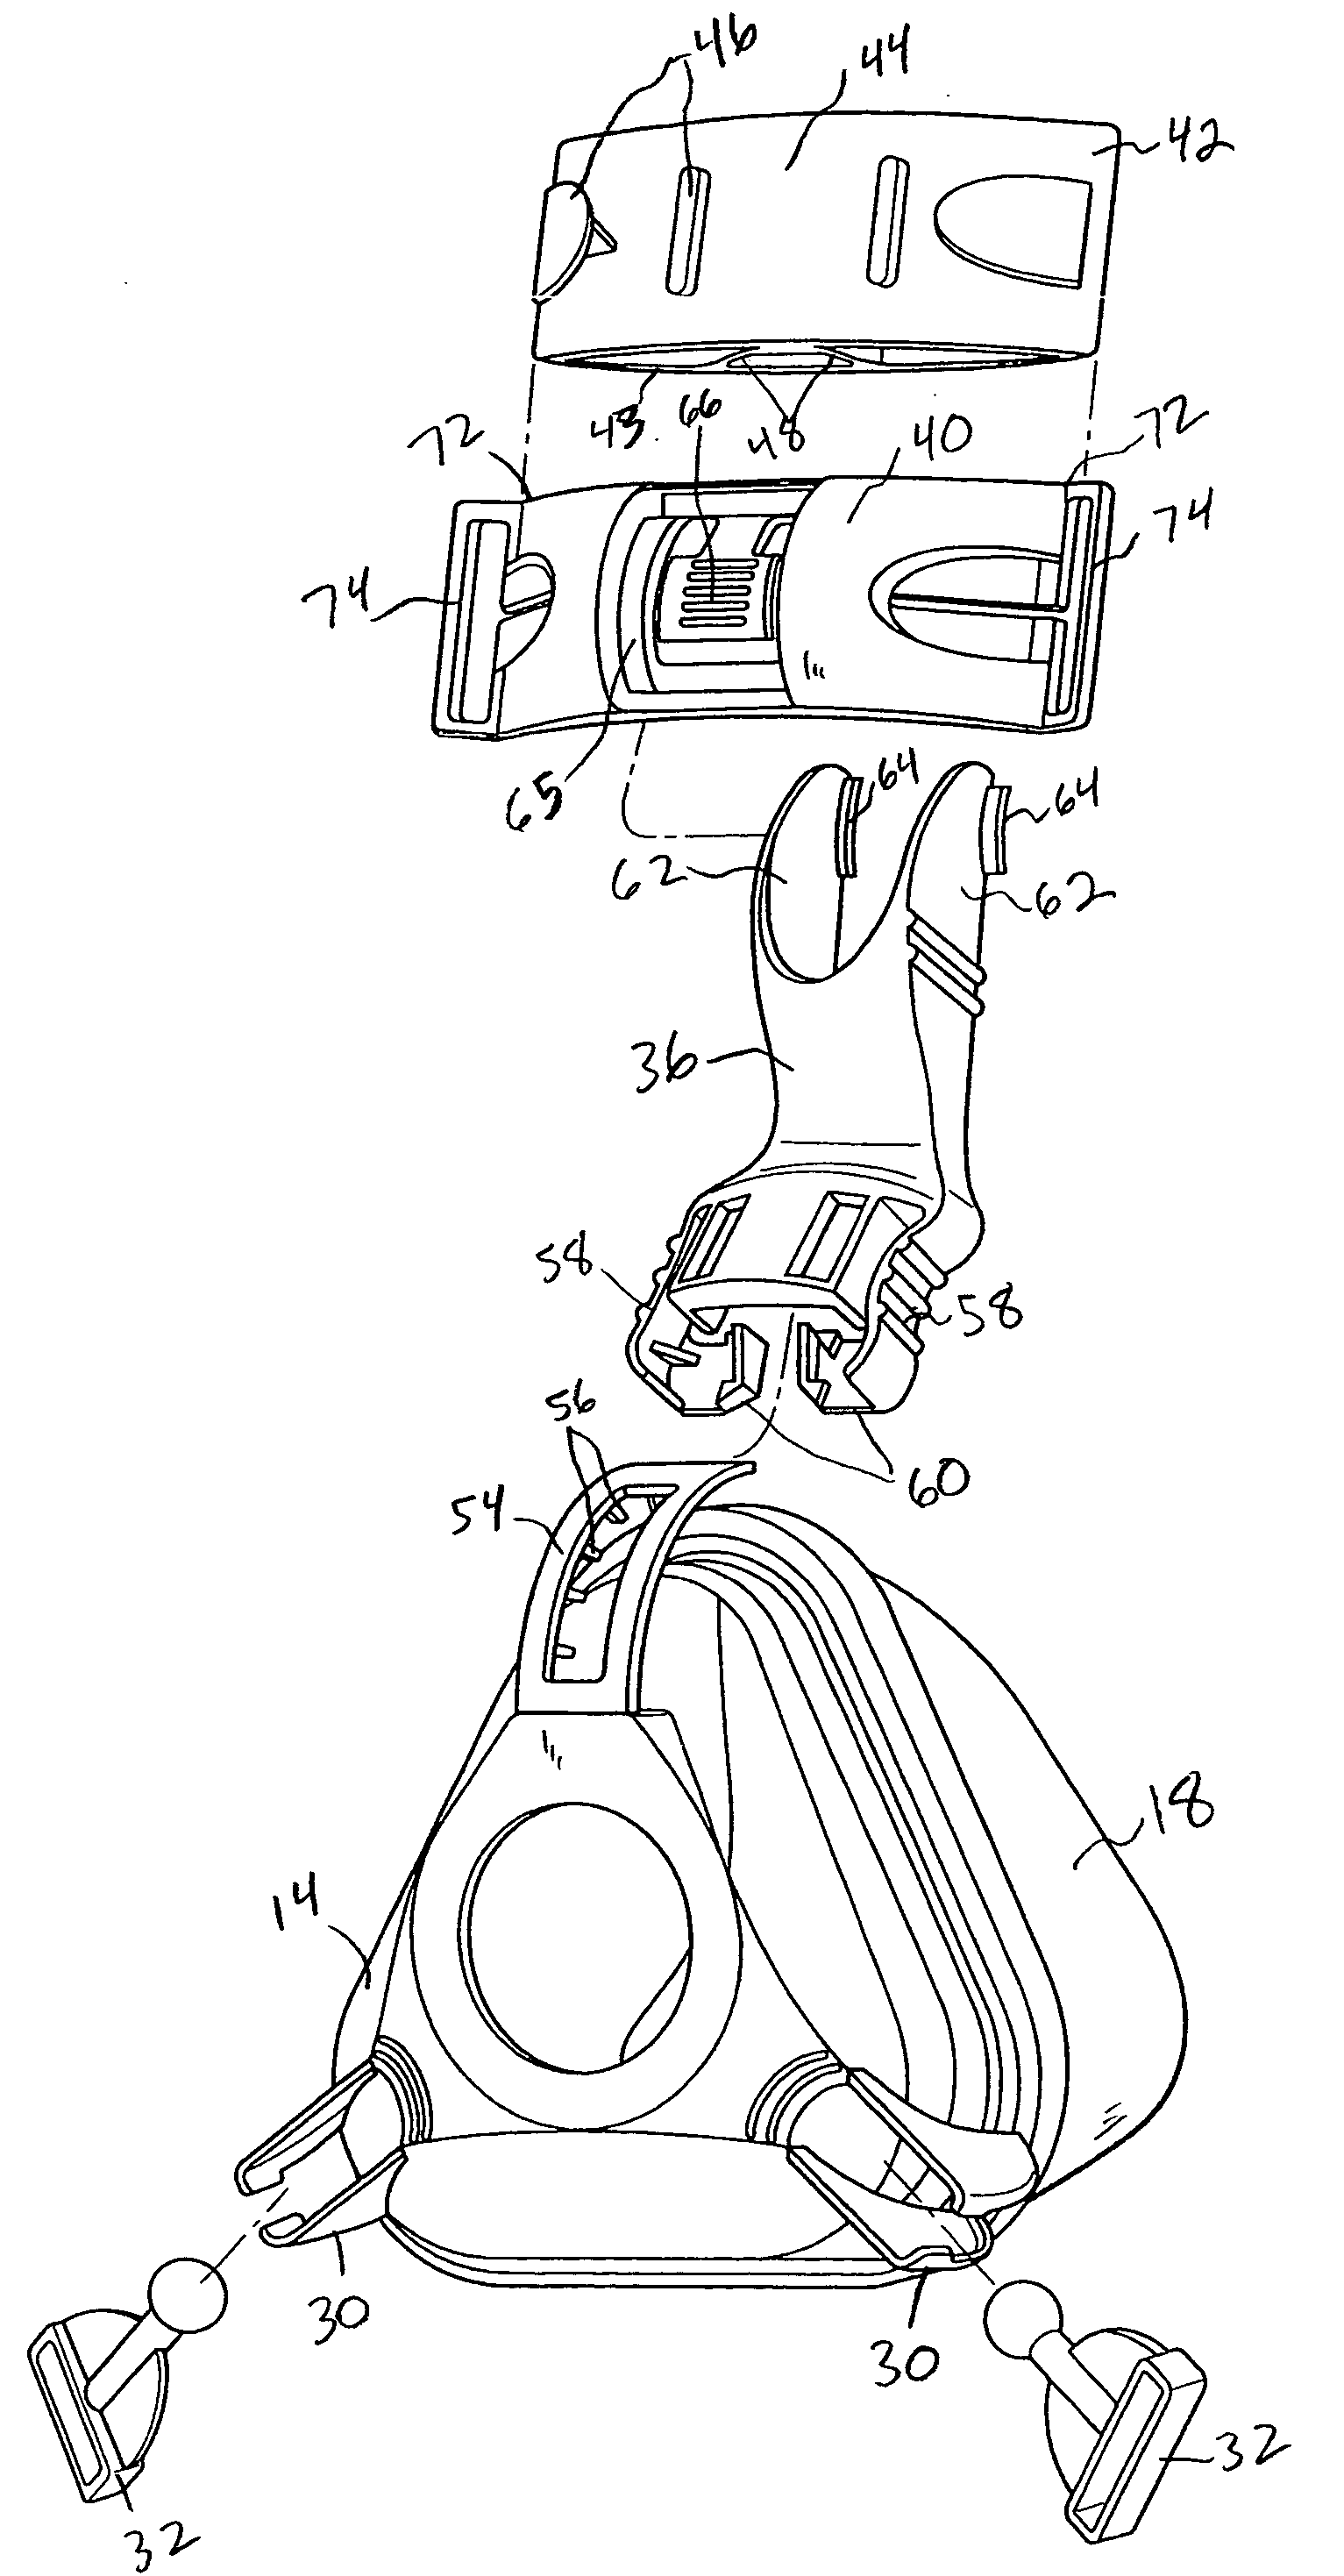 Patient interface with forehead support system